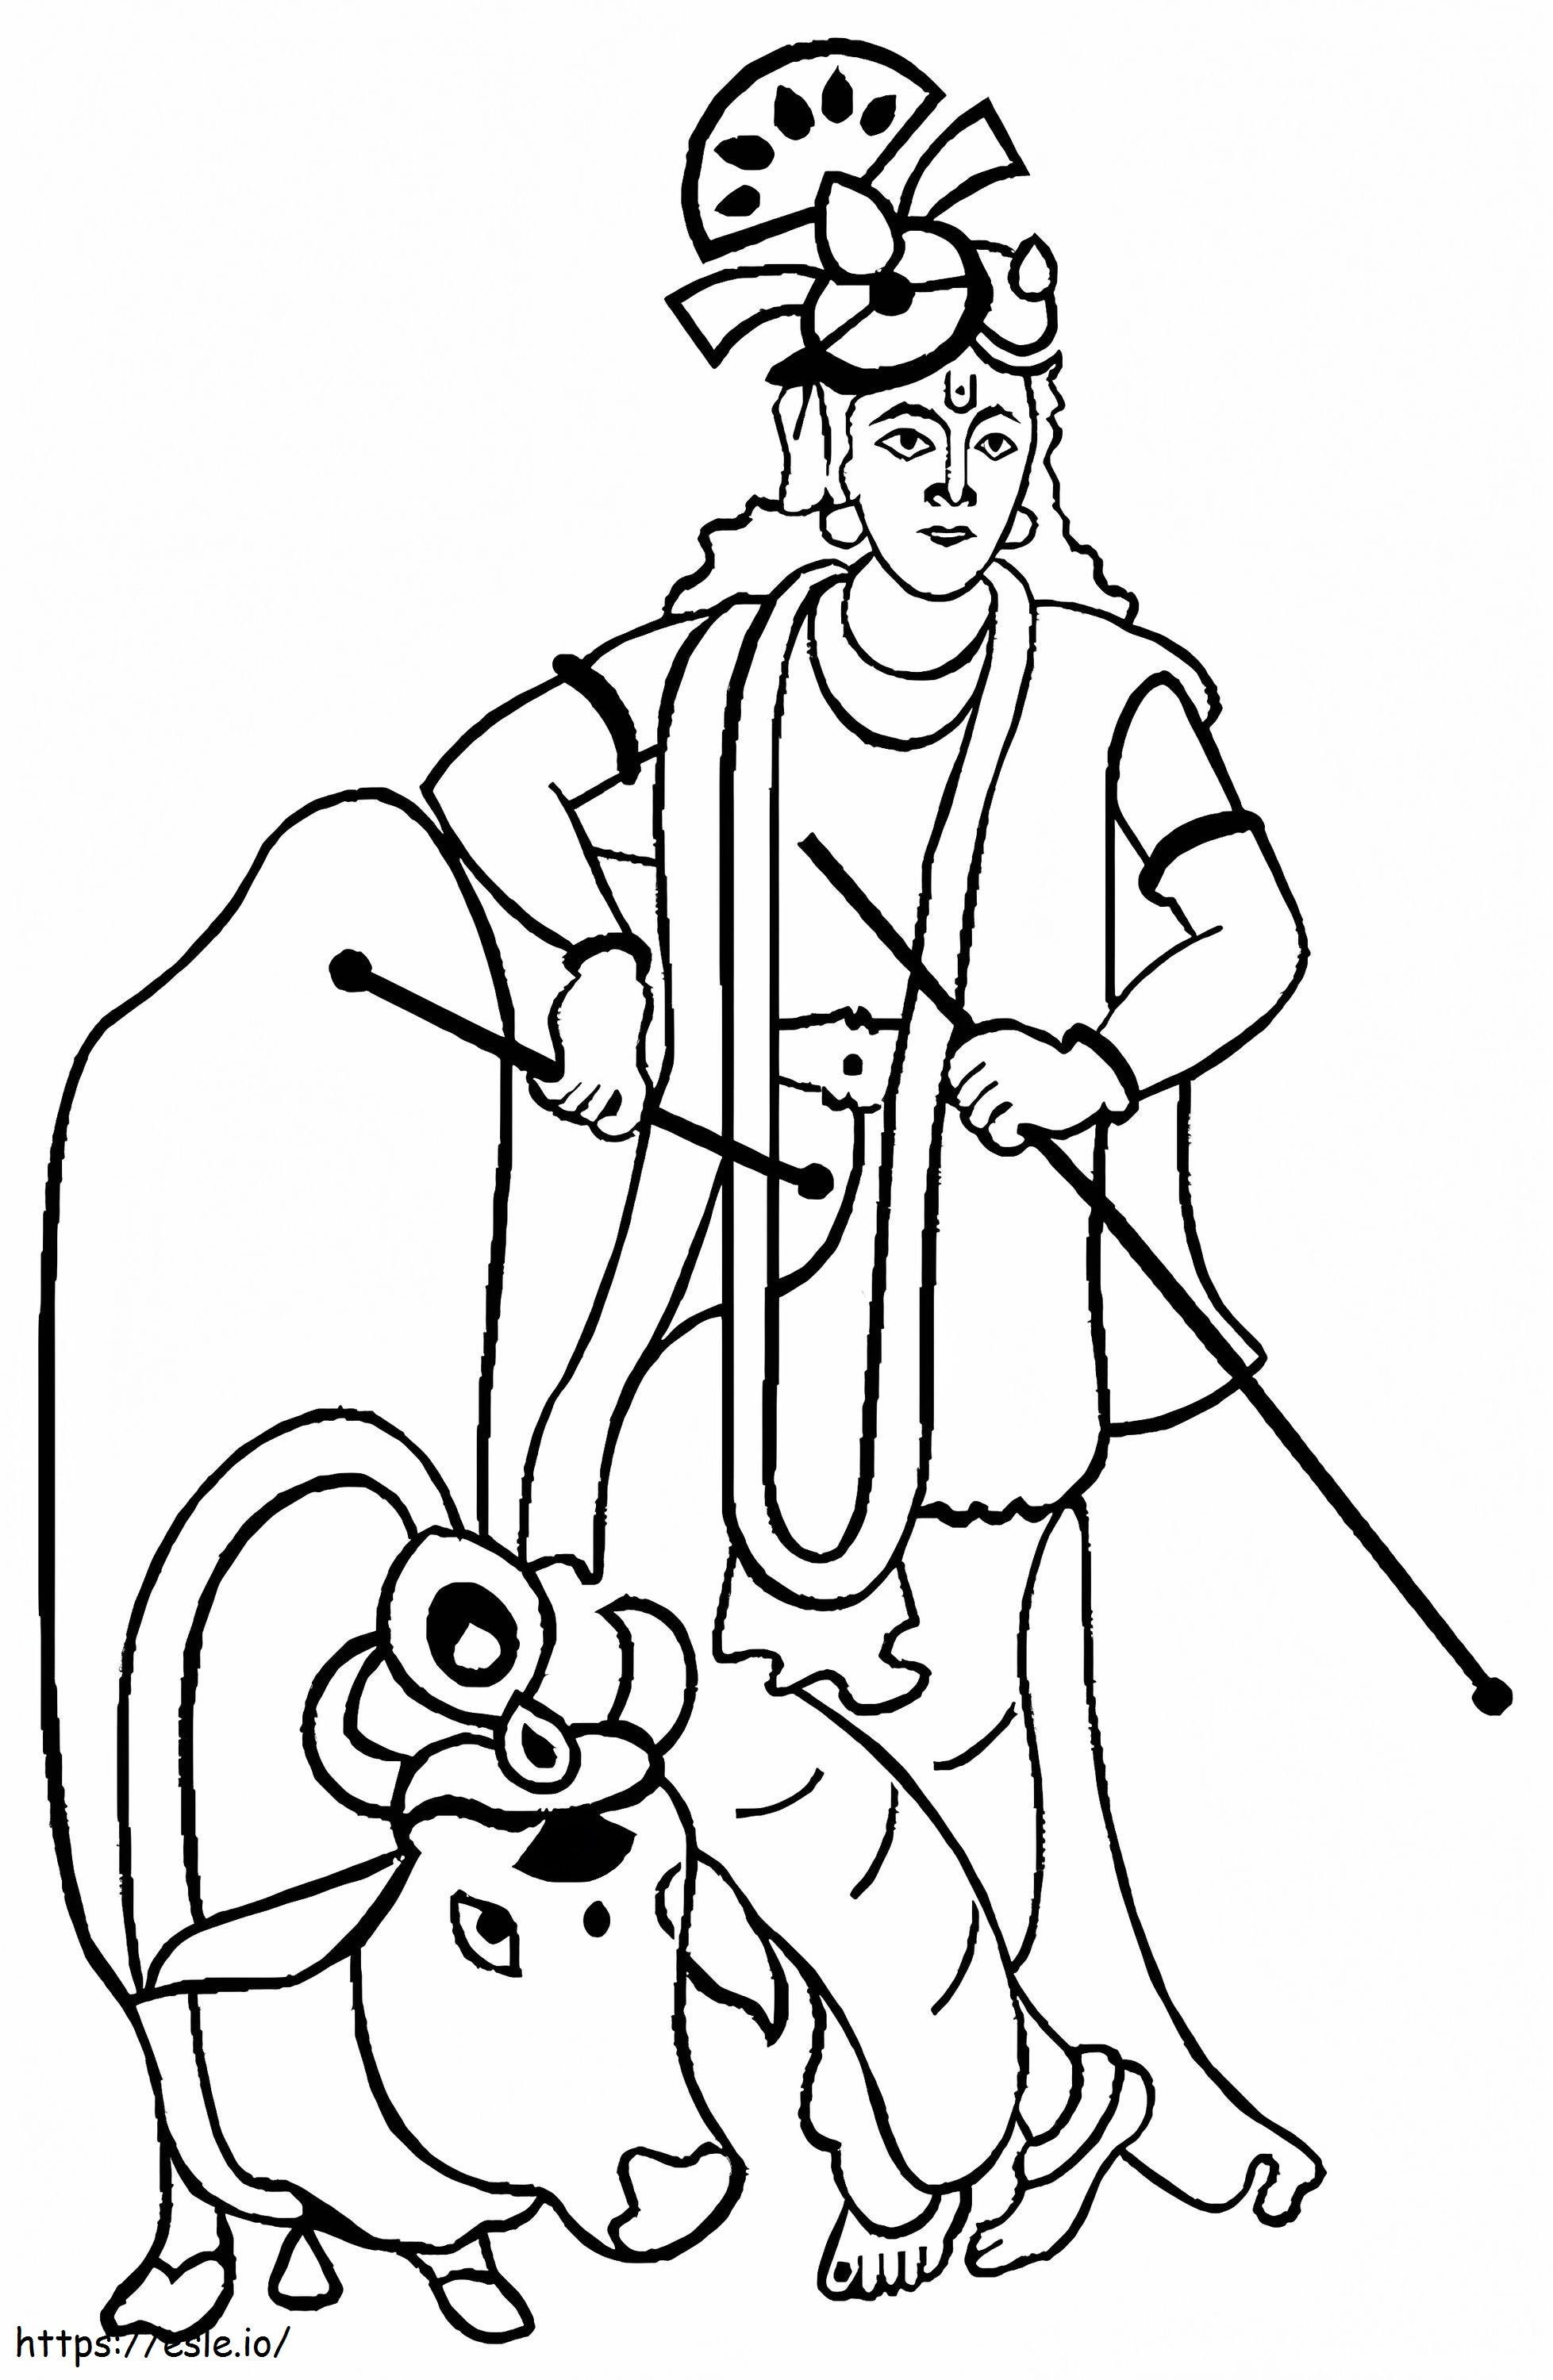 Pongal 3 coloring page